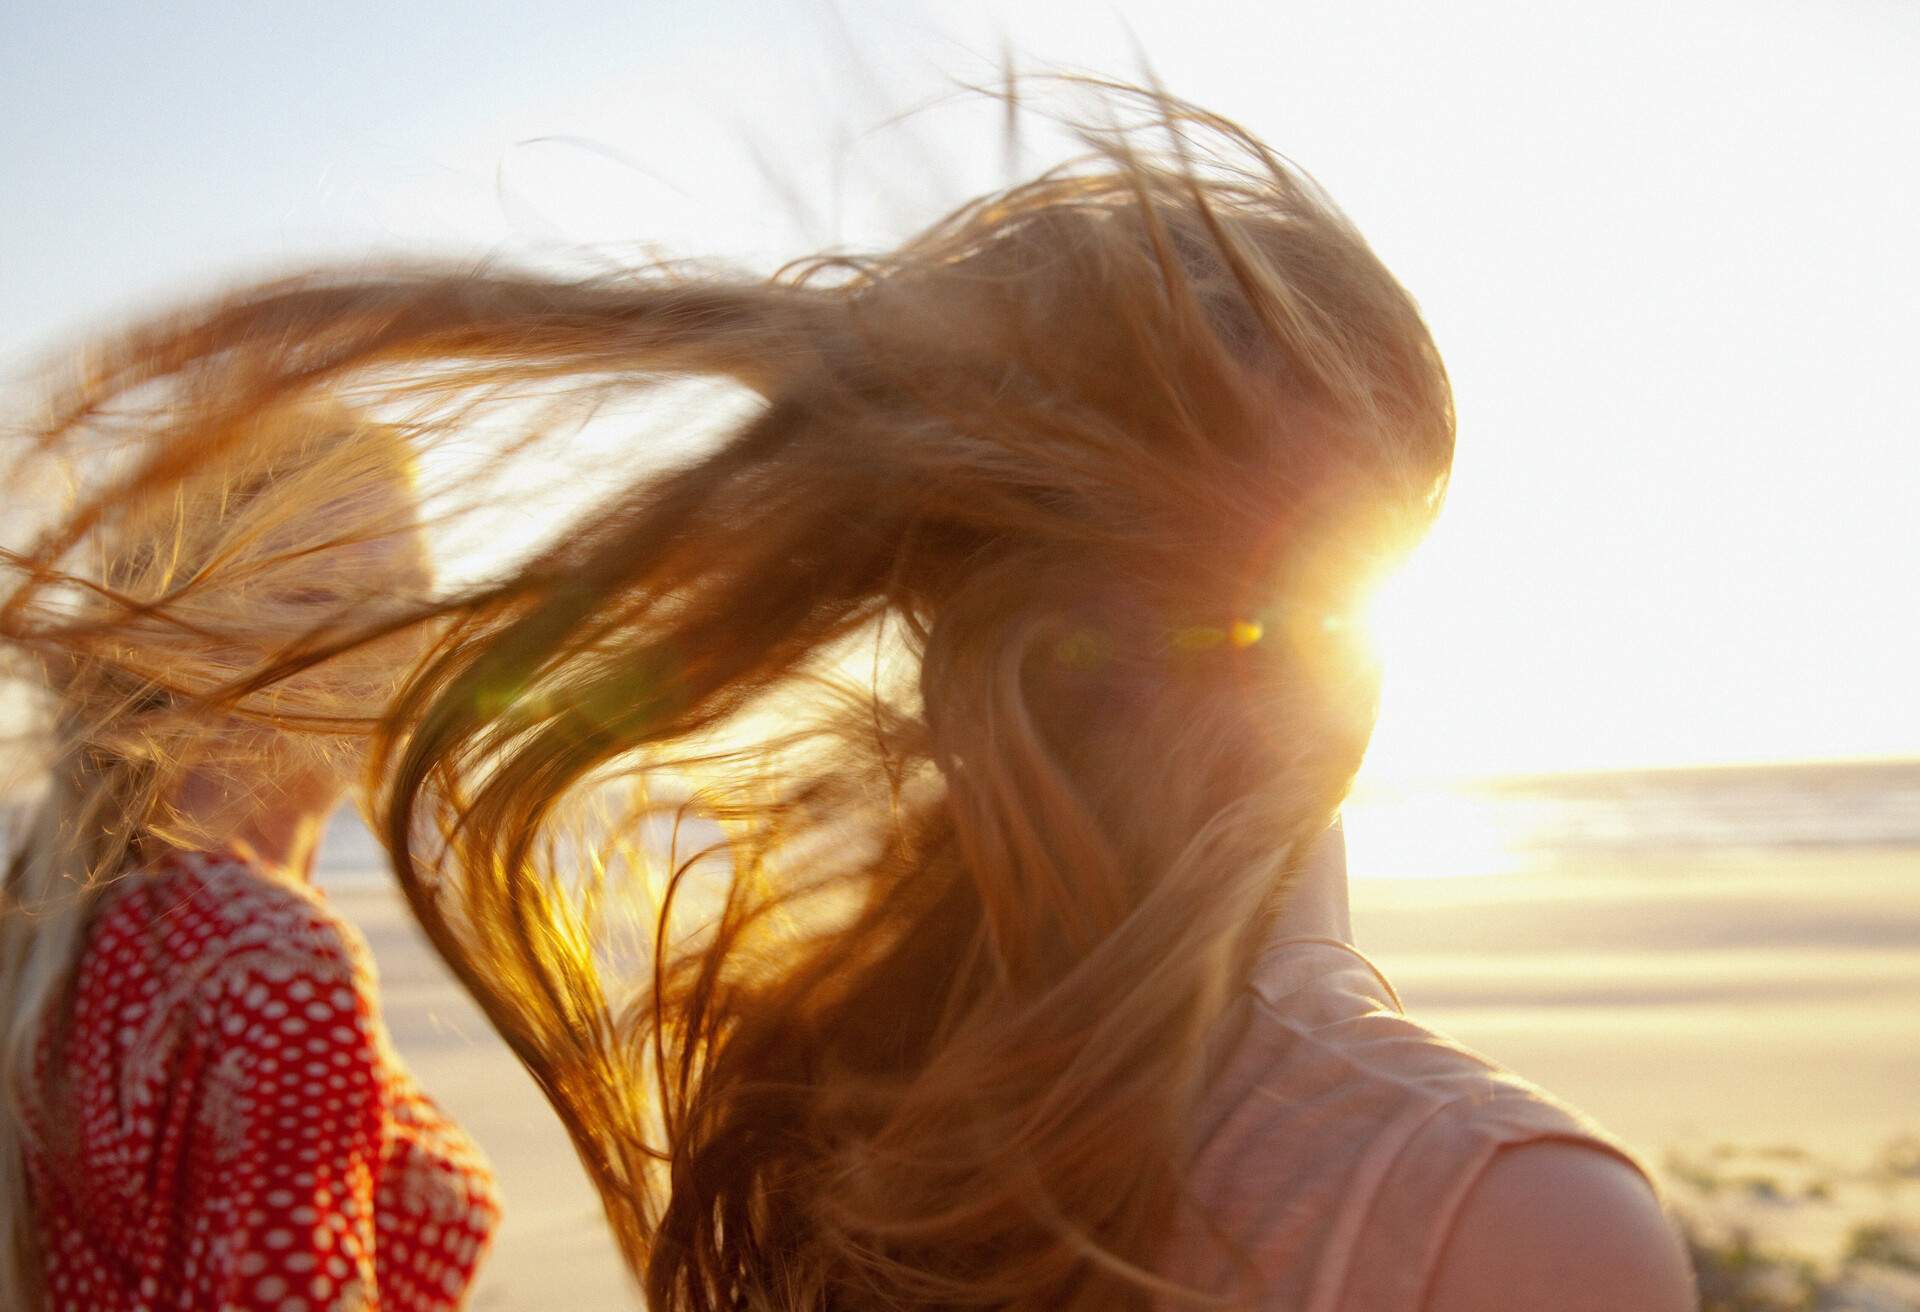 A woman's golden hair being tossed by the breeze as she stands next to another woman on the beach.